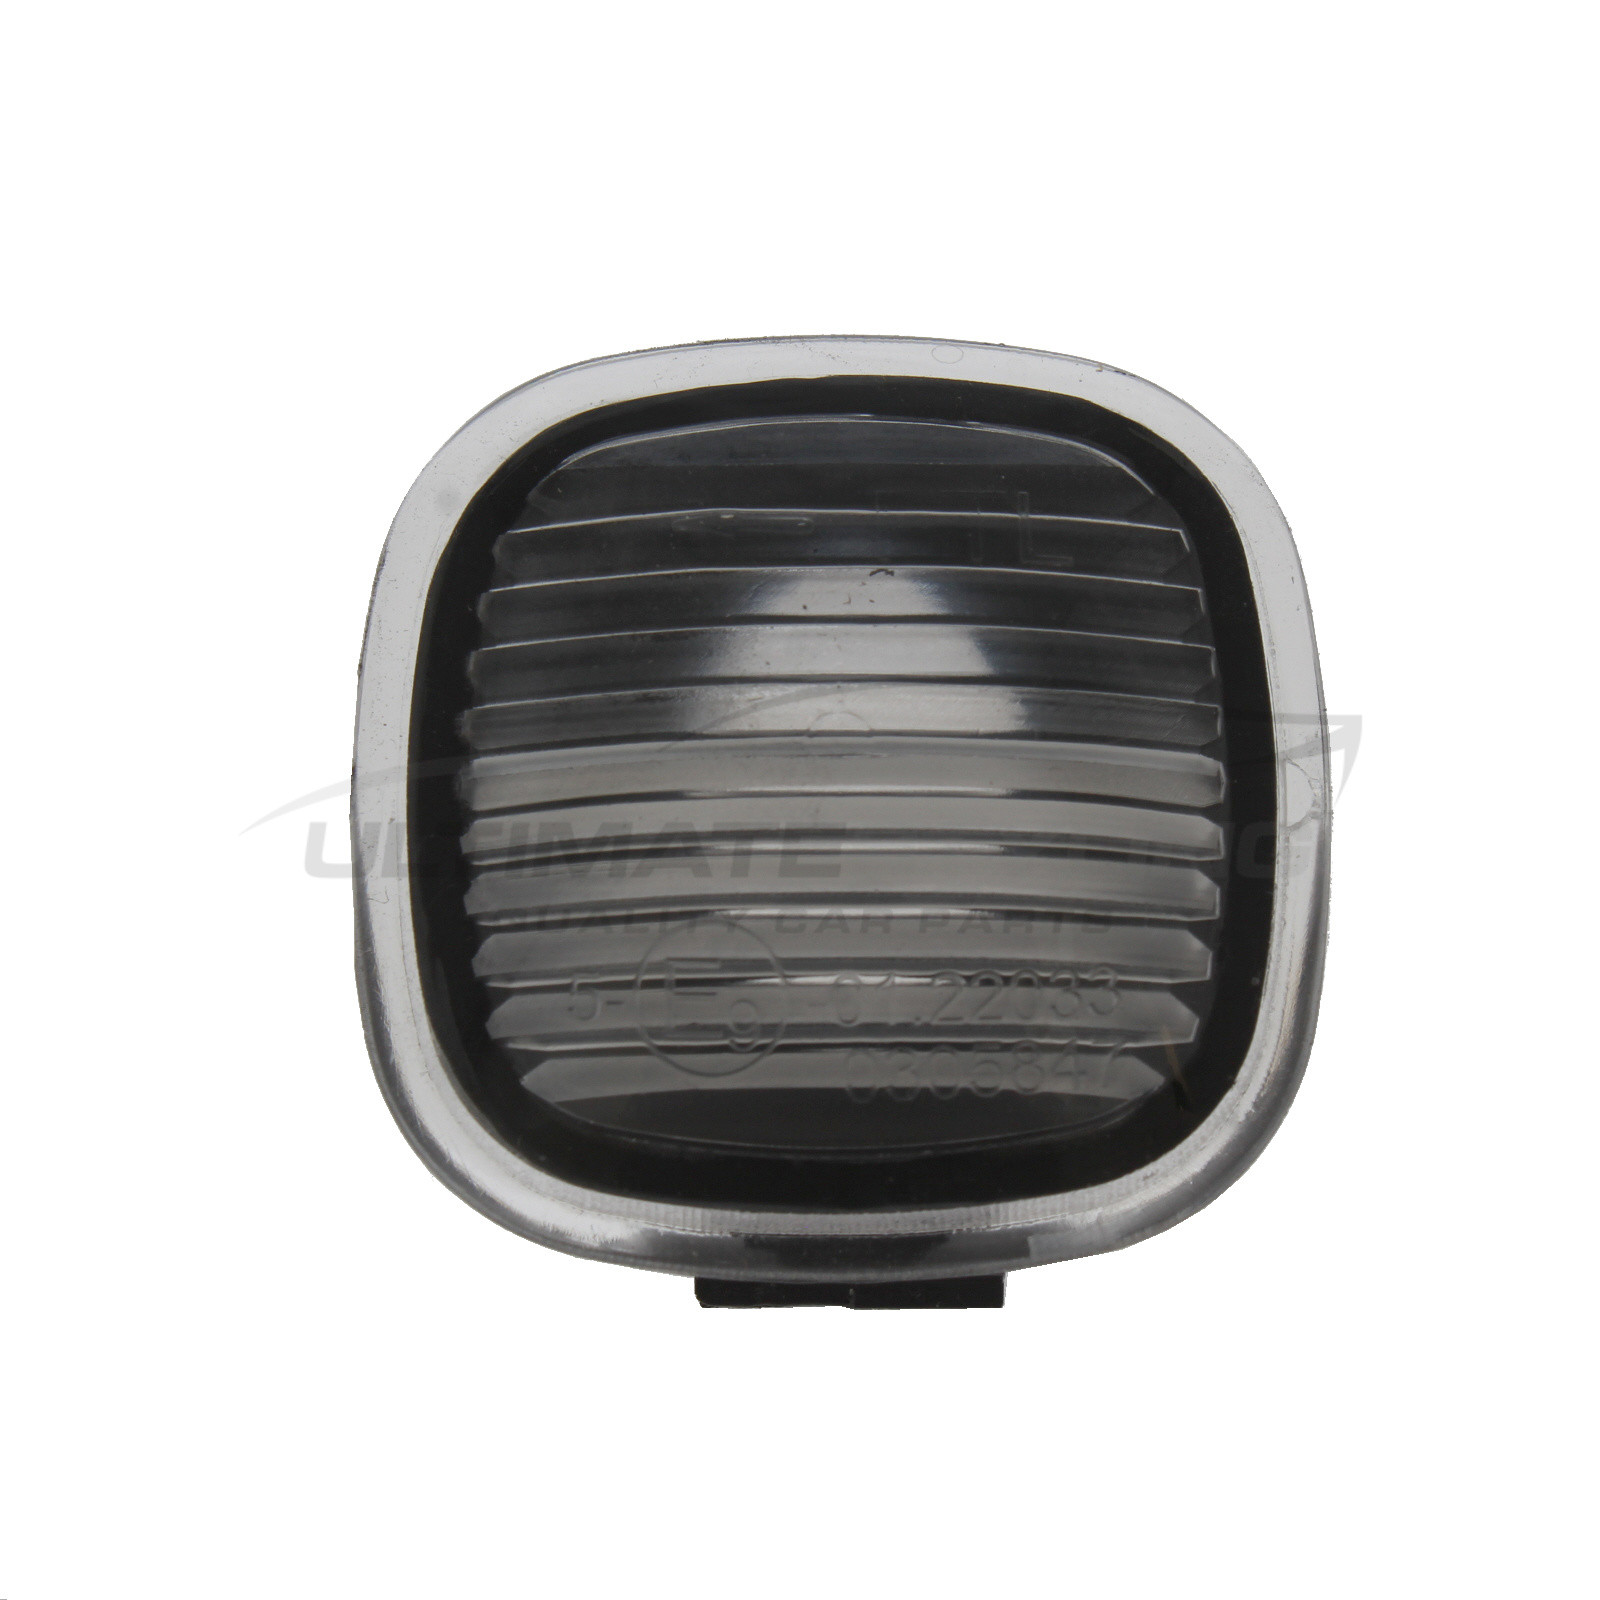 Seat Toledo, Skoda Fabia / Octavia / Rapid / Roomster Side Repeater - Universal (LH or RH) - Smoked lens - Non-LED